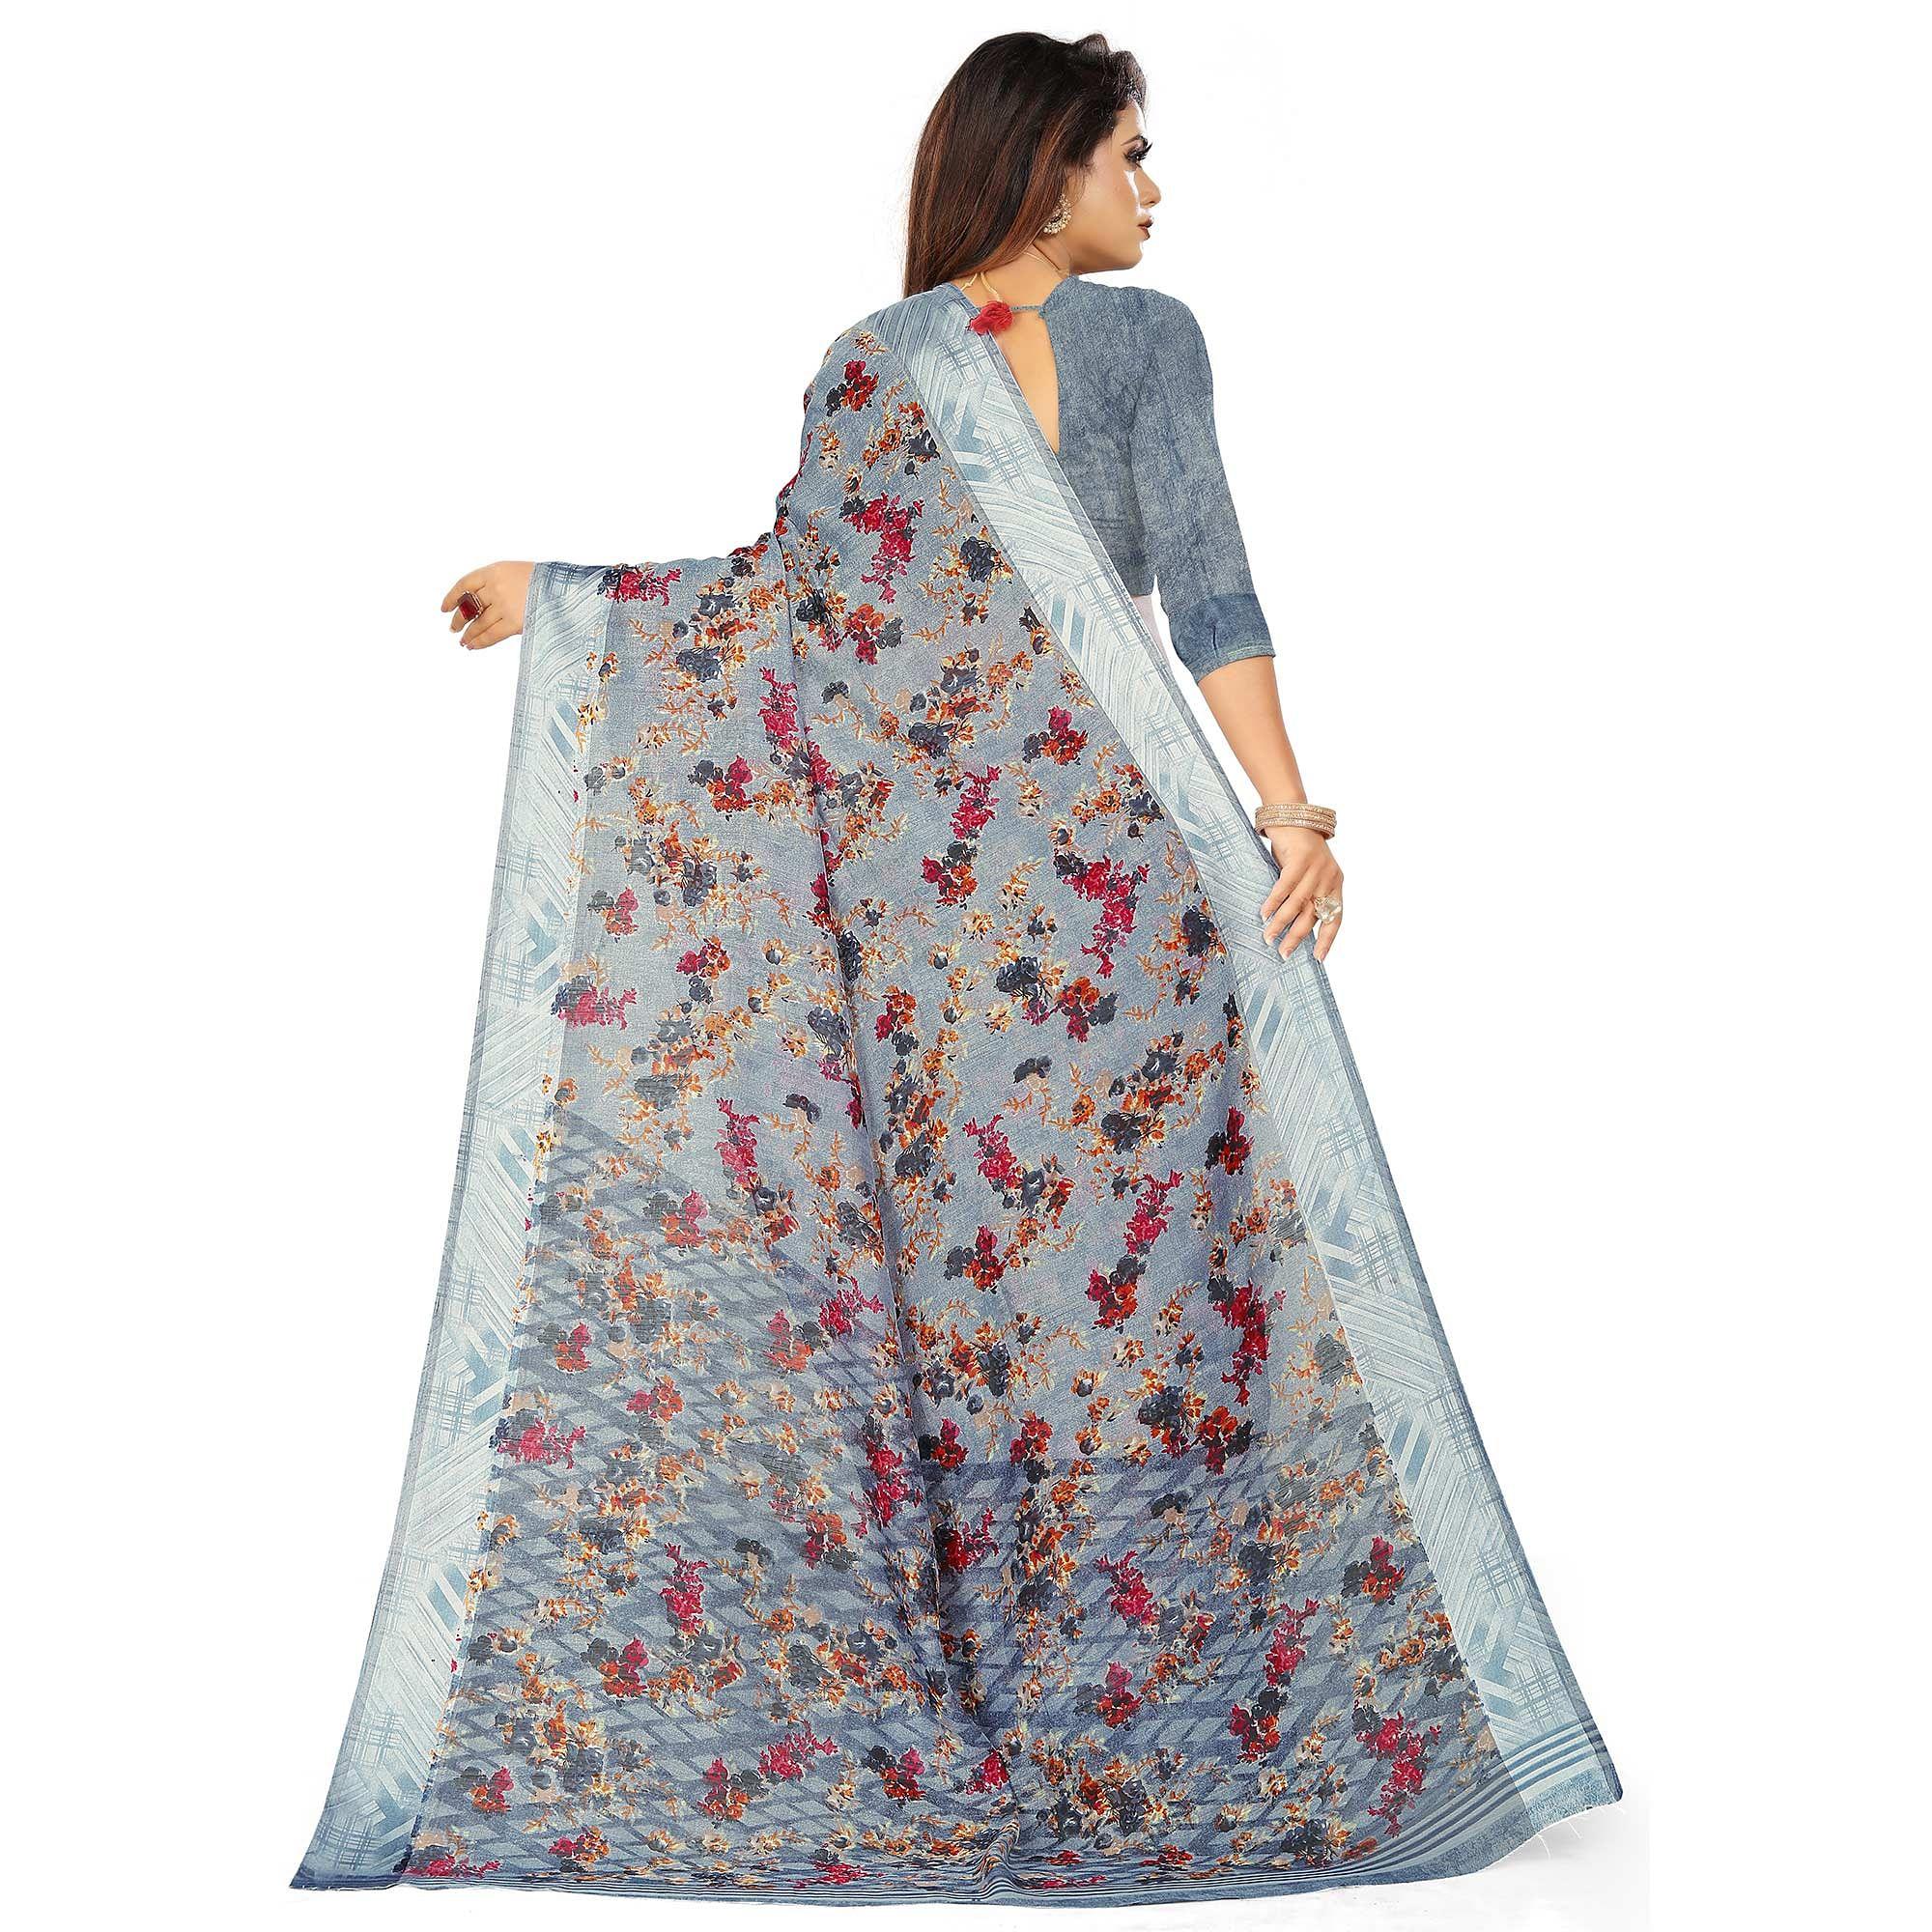 Prominent Grey Colored Casual Wear Floral Printed Linen Saree With Satin Patta Border - Peachmode